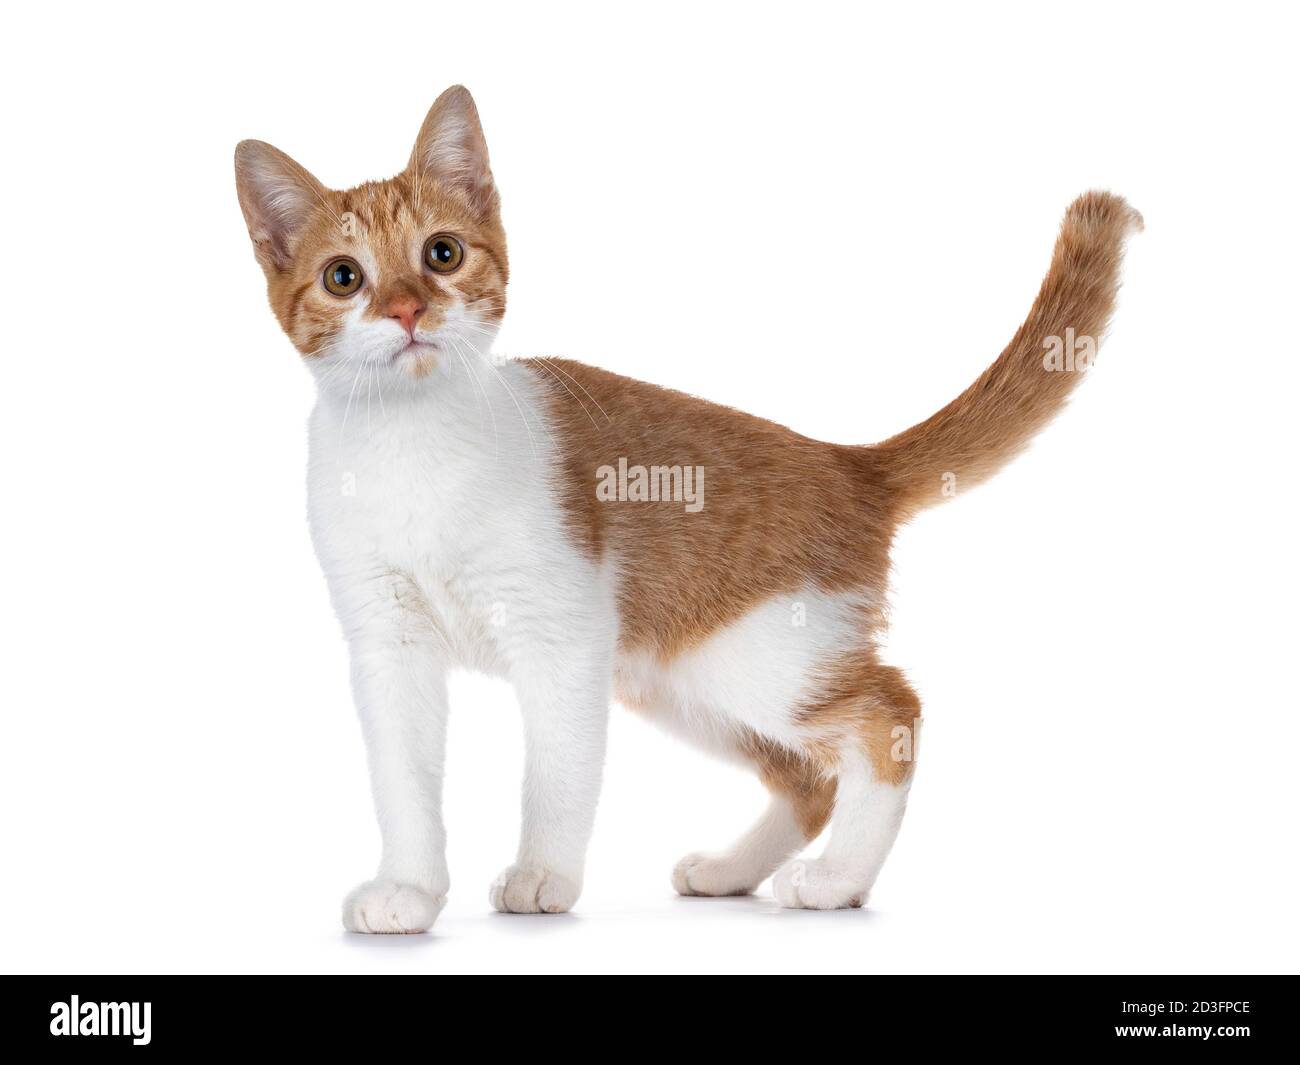 Cute young red with white non breed cat, standing side ways. Looking towards camera with sweet brown eyes. Isolated on a white background. Tail fierce Stock Photo